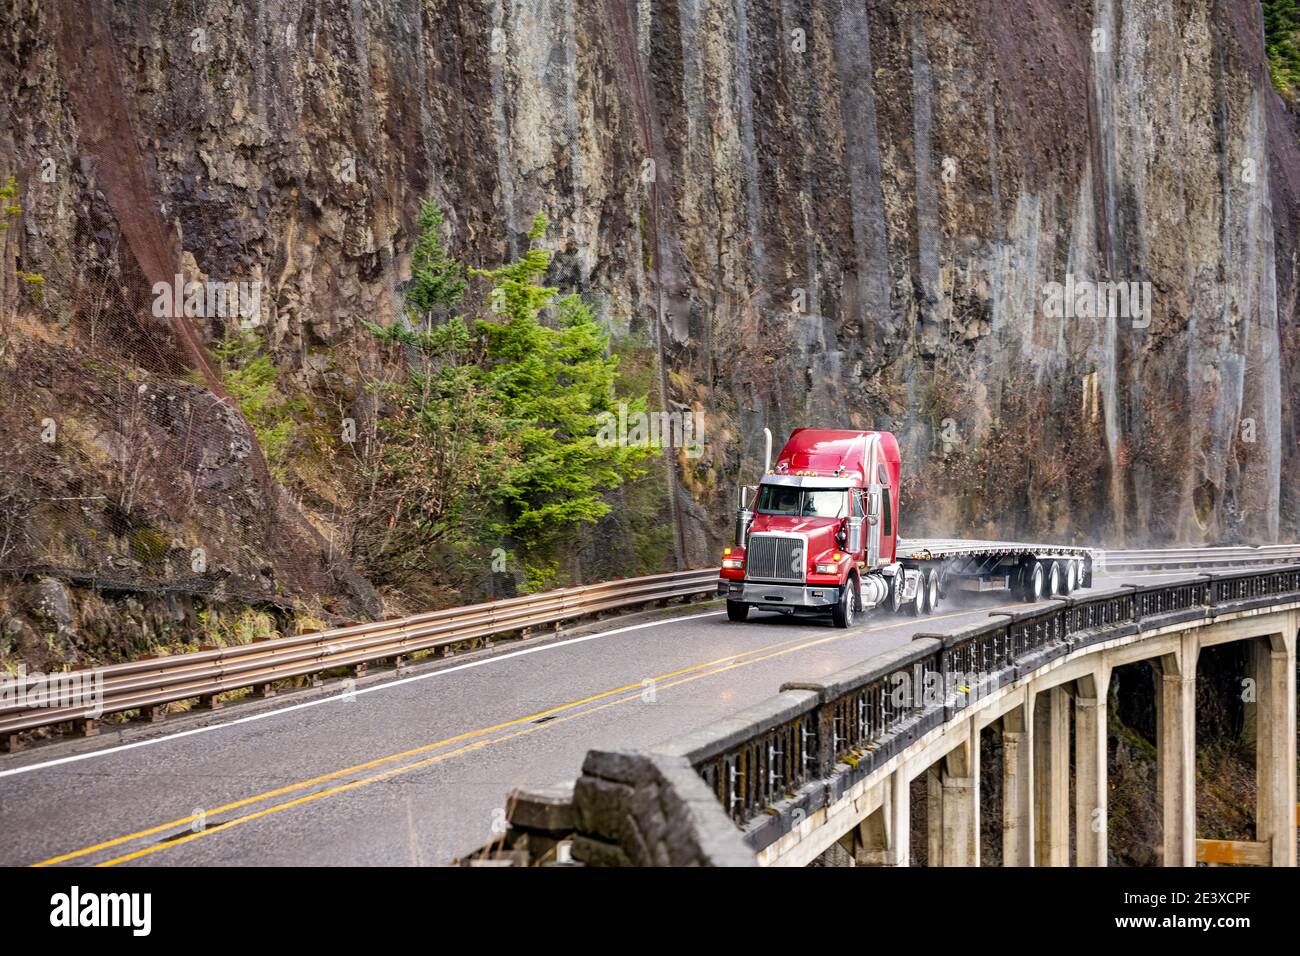 Big rig red semi truck with chrome pipes transporting empty flat bed semi trailer running on the winding wet road with rain dust driving on the bridge Stock Photo